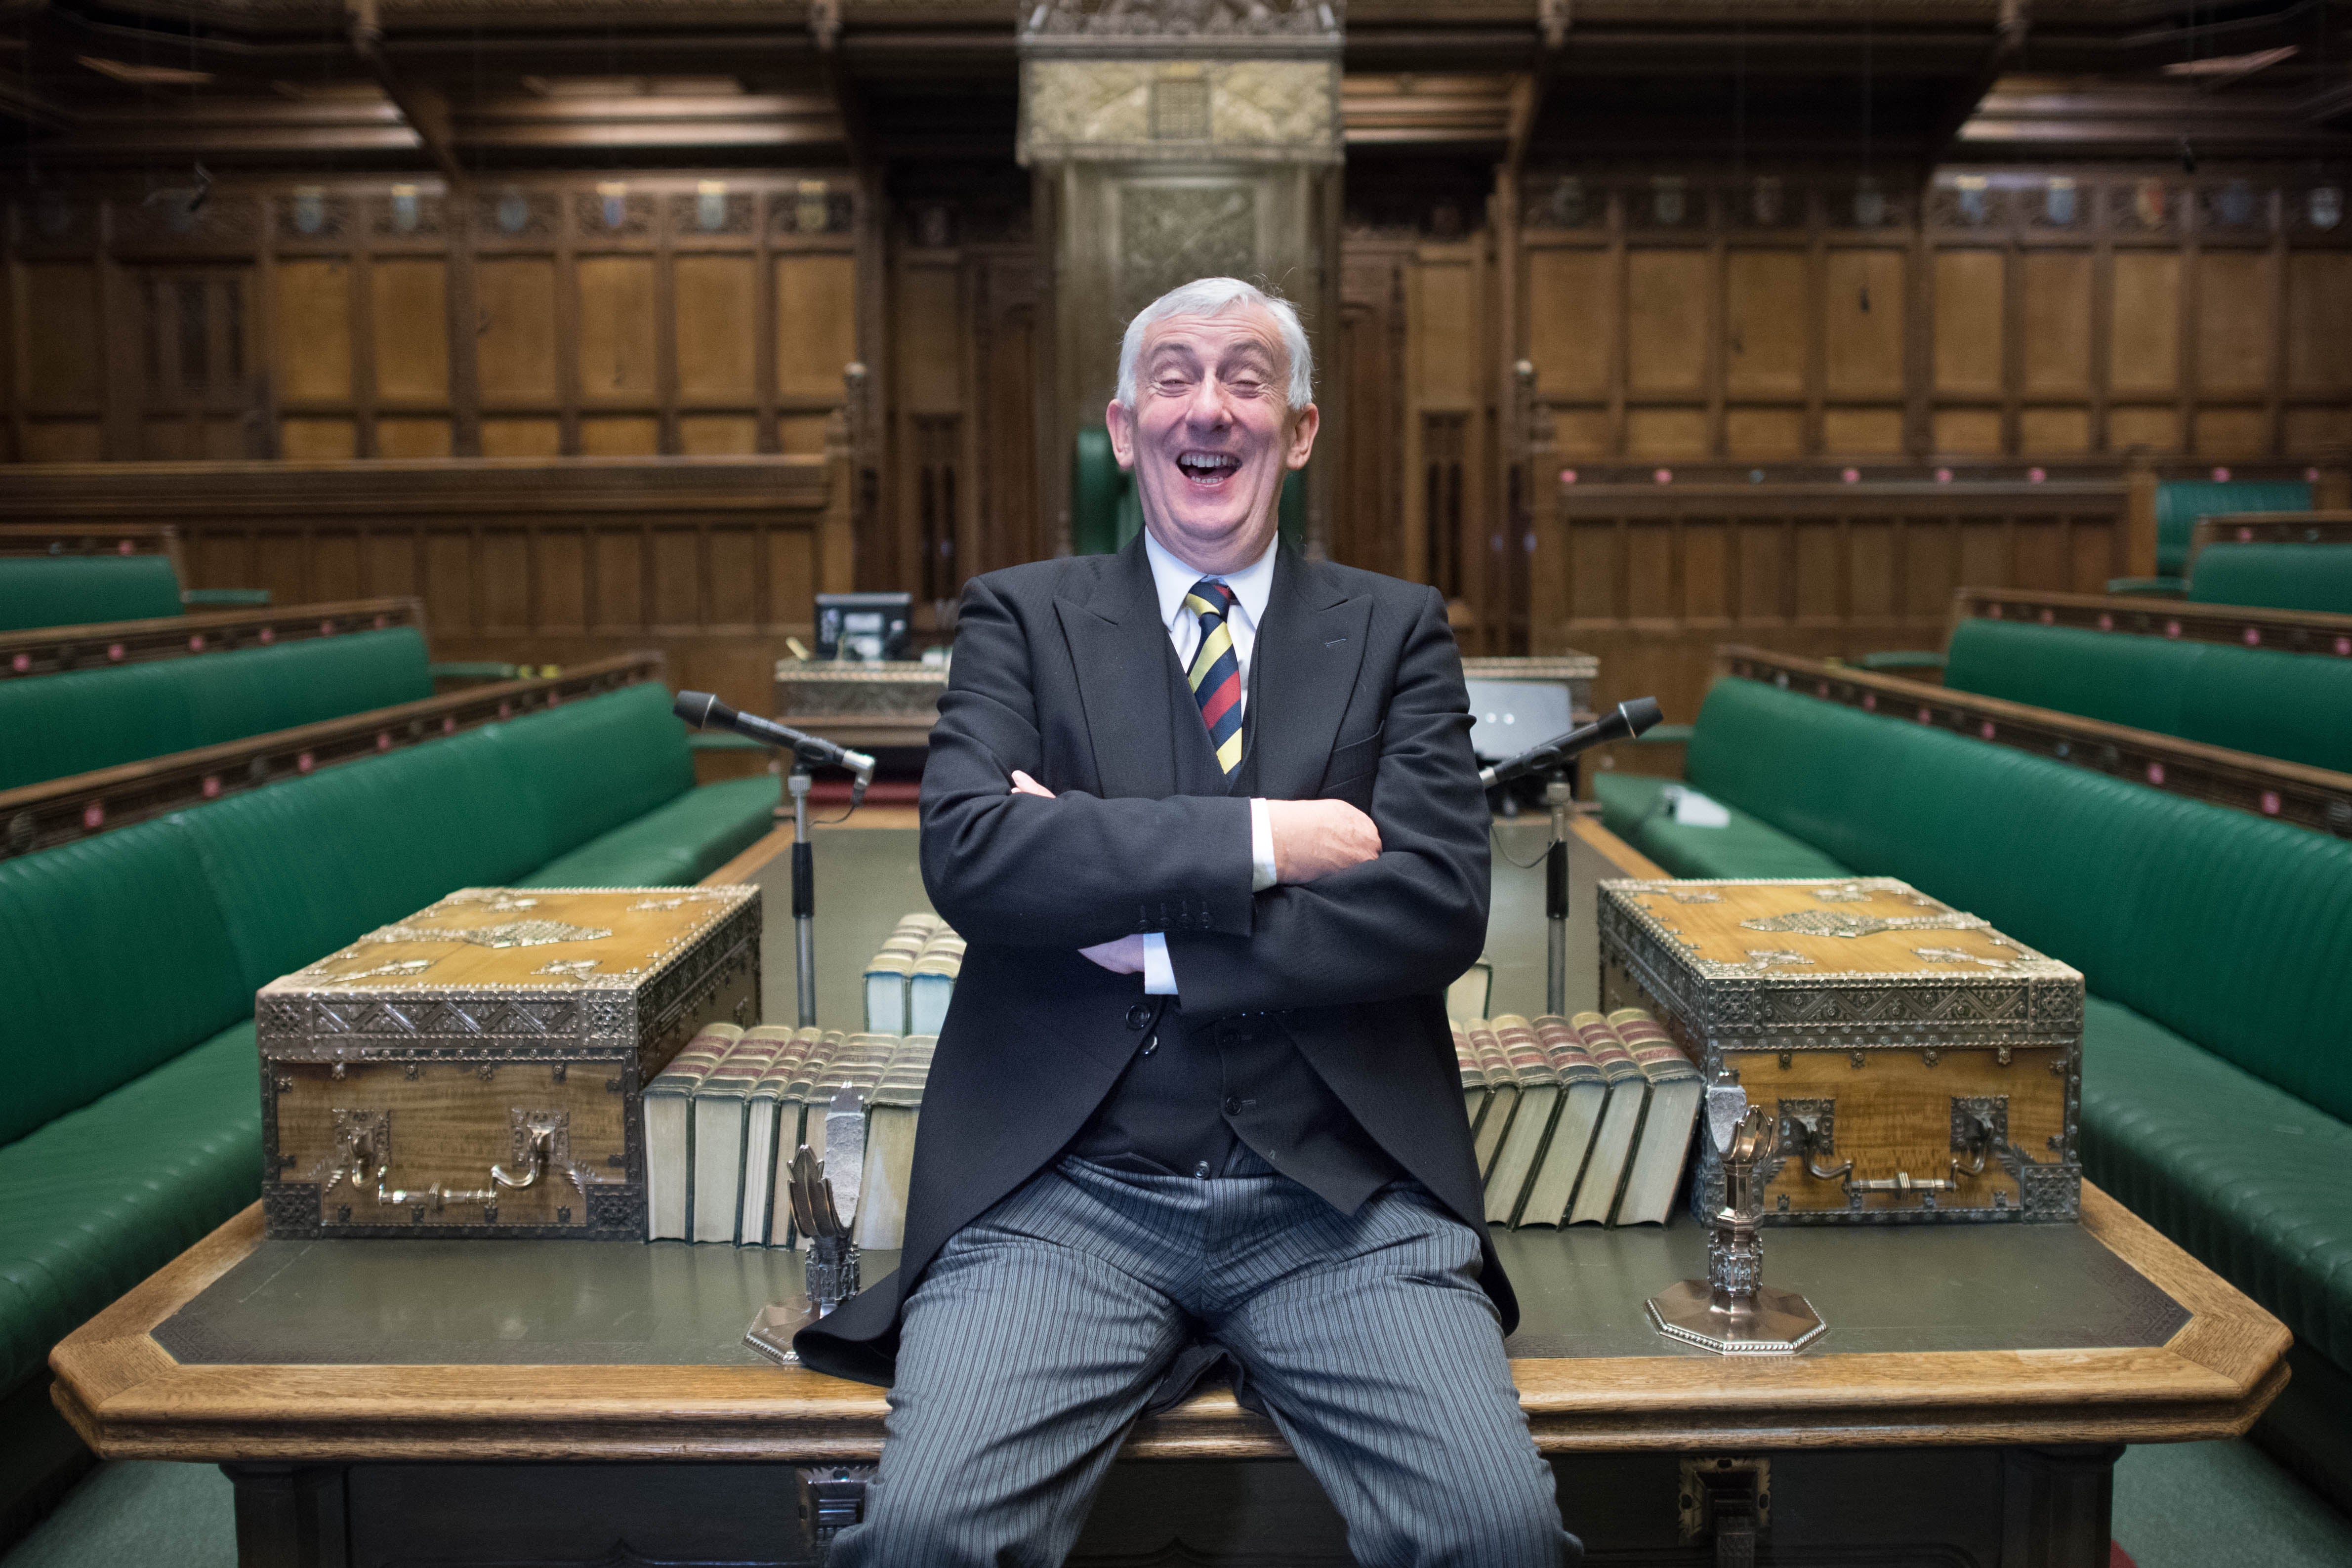 There have been calls for Lindsay Hoyle to resign